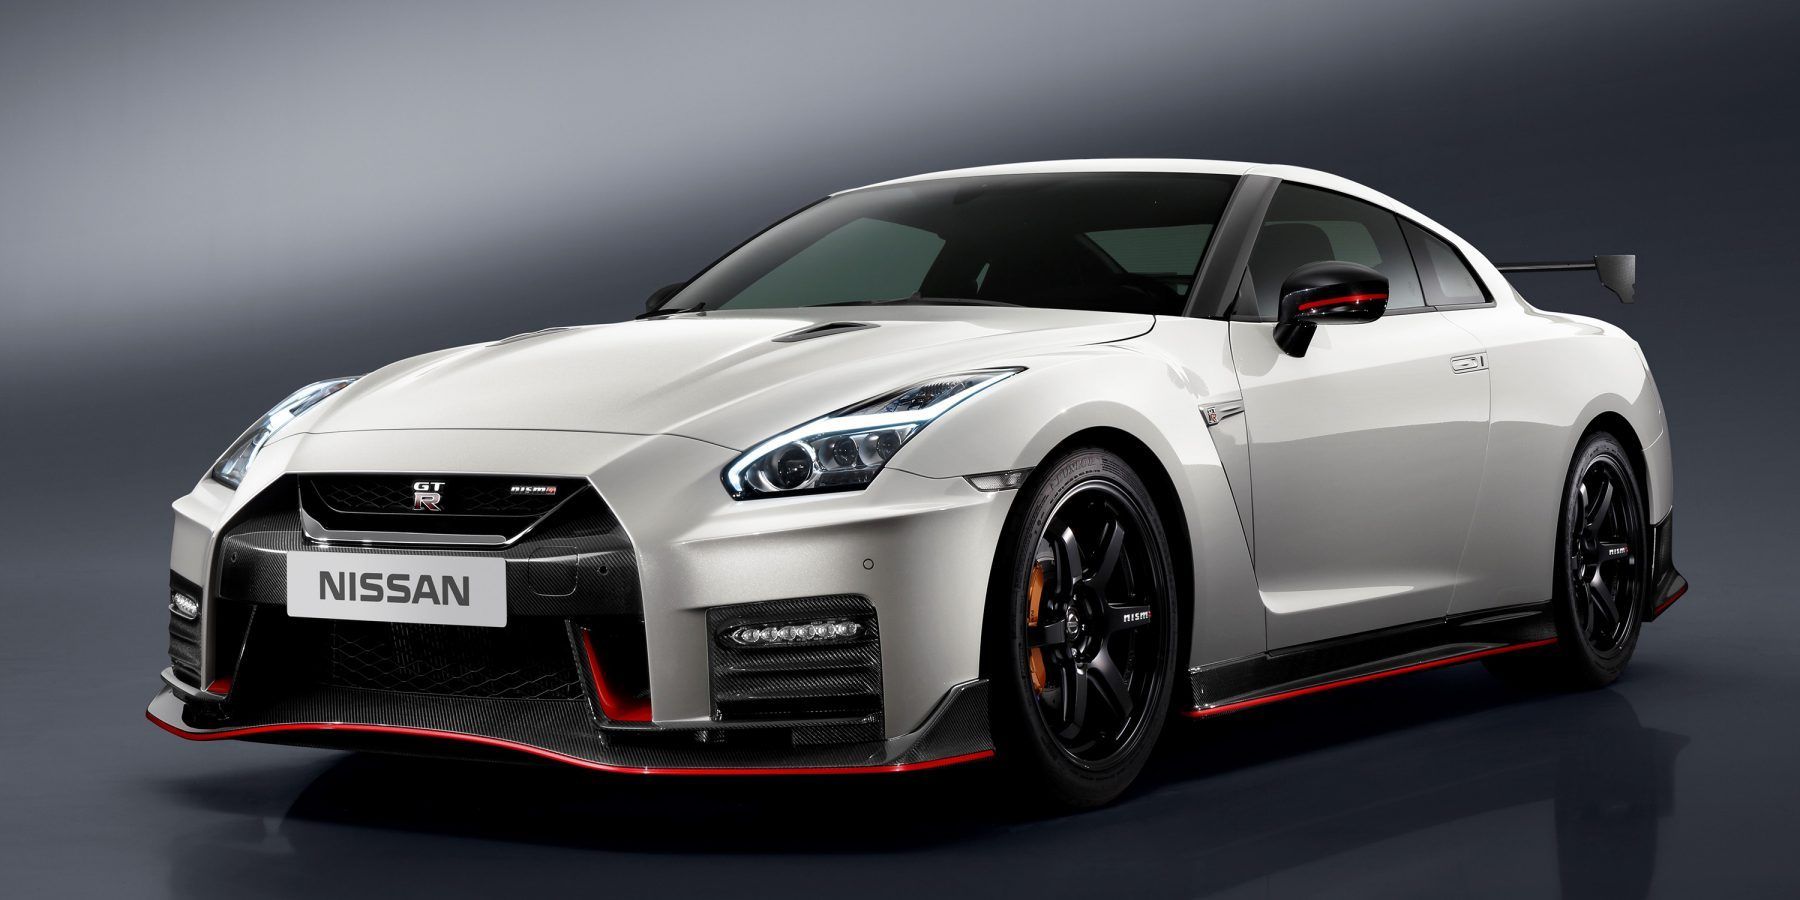 2020 Nissan GT-R Nismo, white, red striped bumpers, Nissan